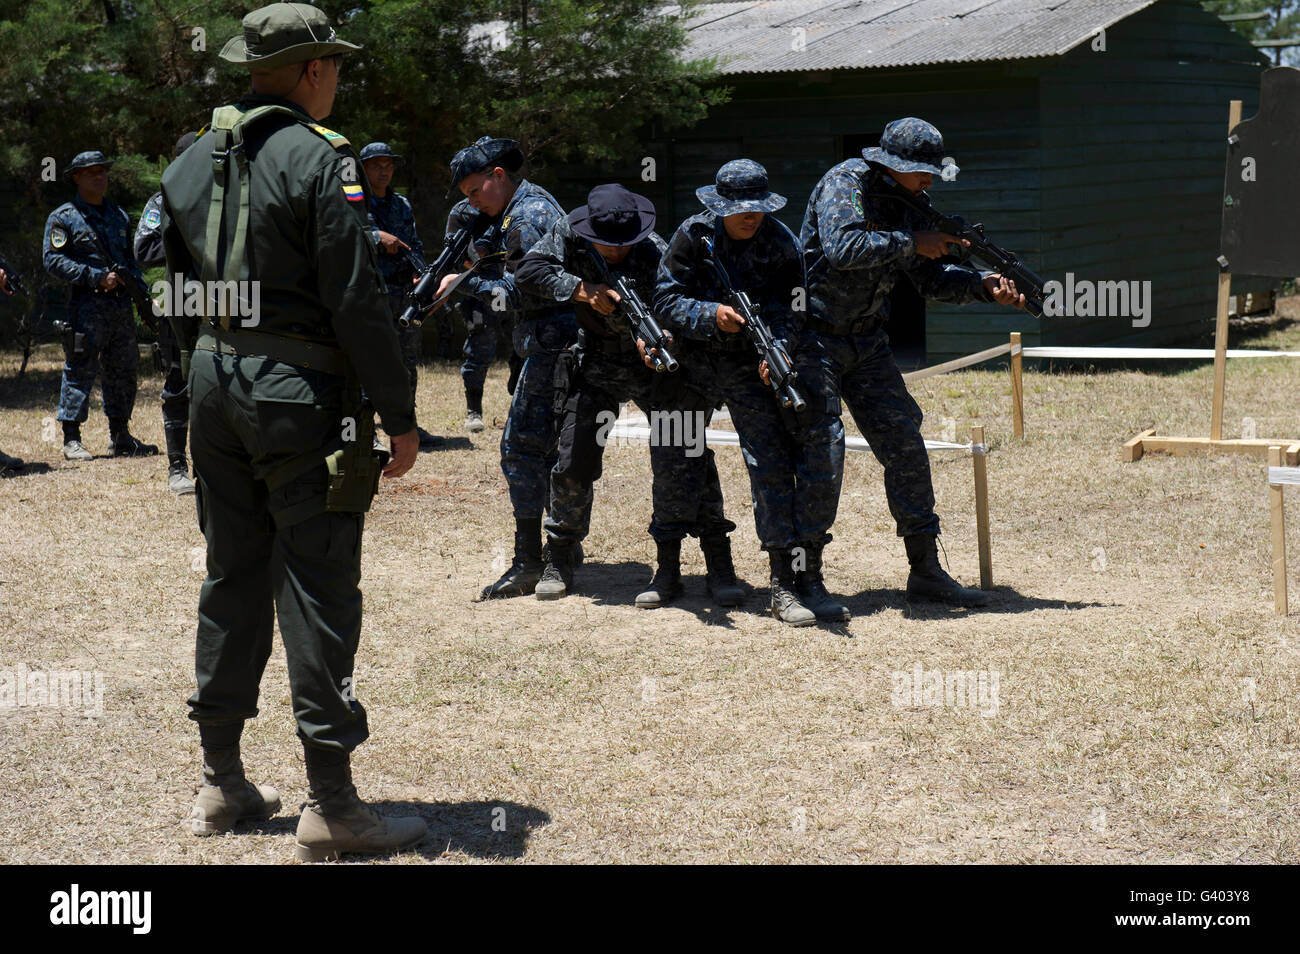 A Jungla from the Columbian National Police observes TIGRES trainees. Stock Photo